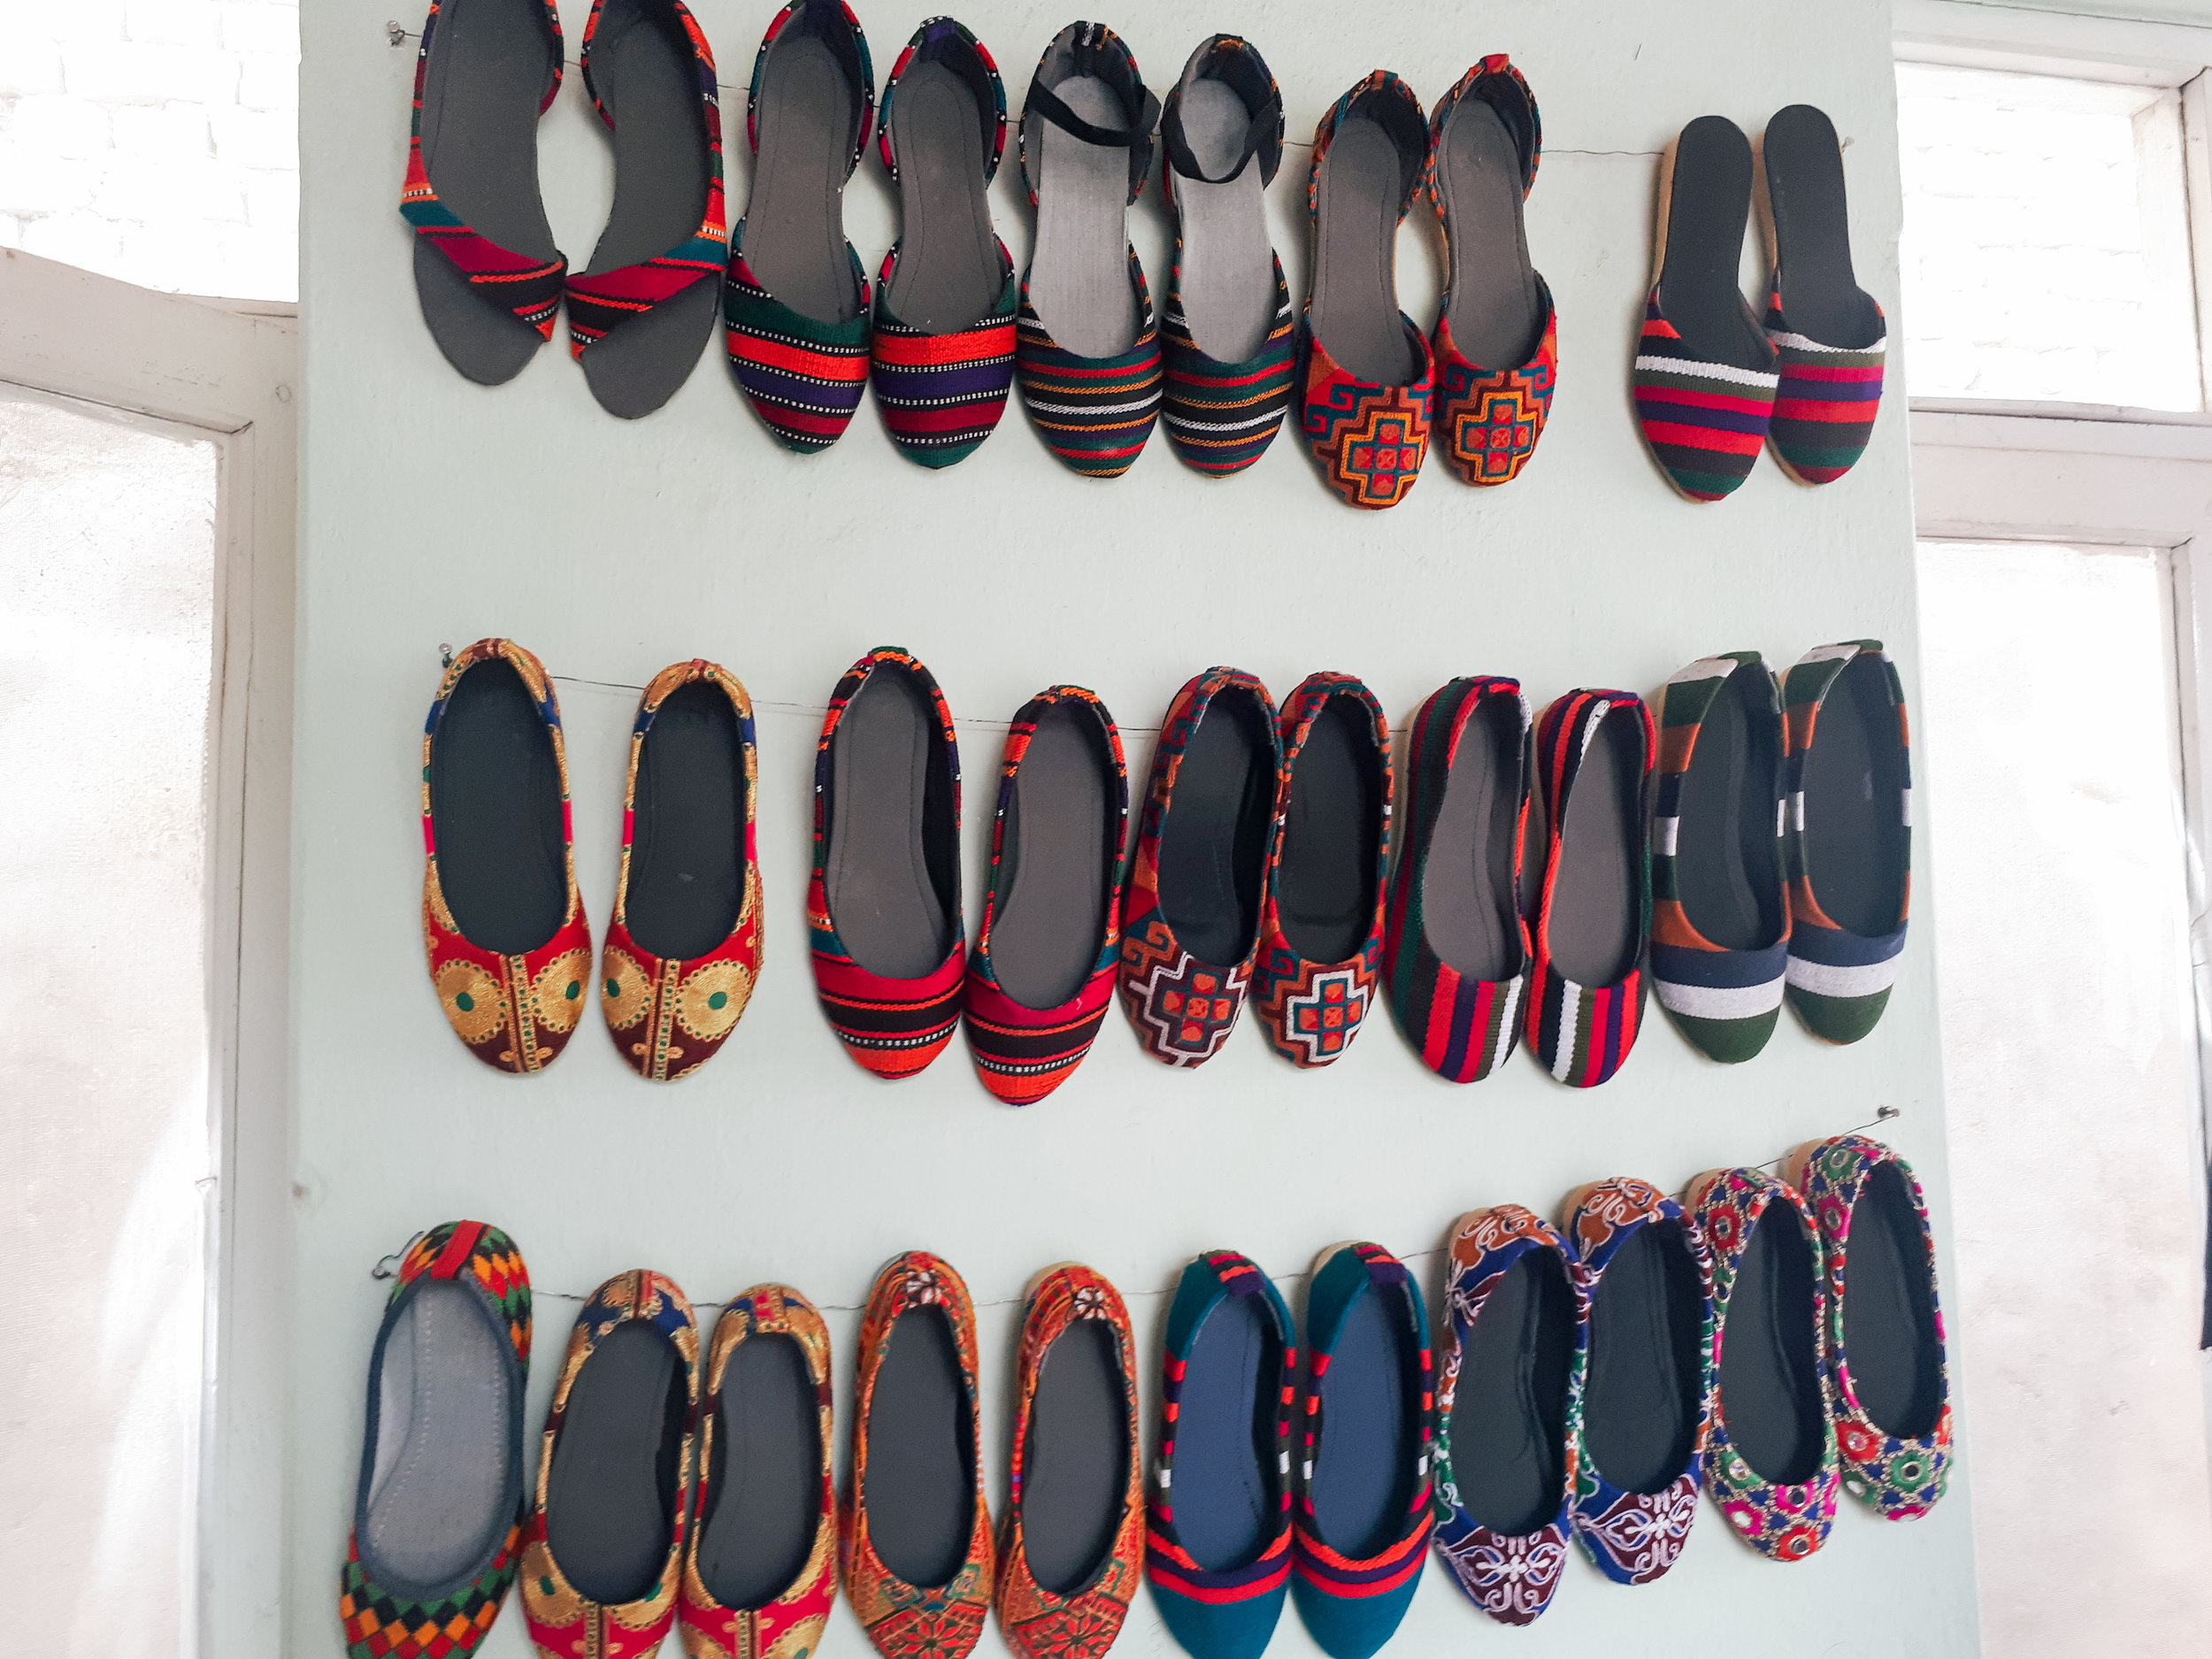 The results of our shoe making vocational training class